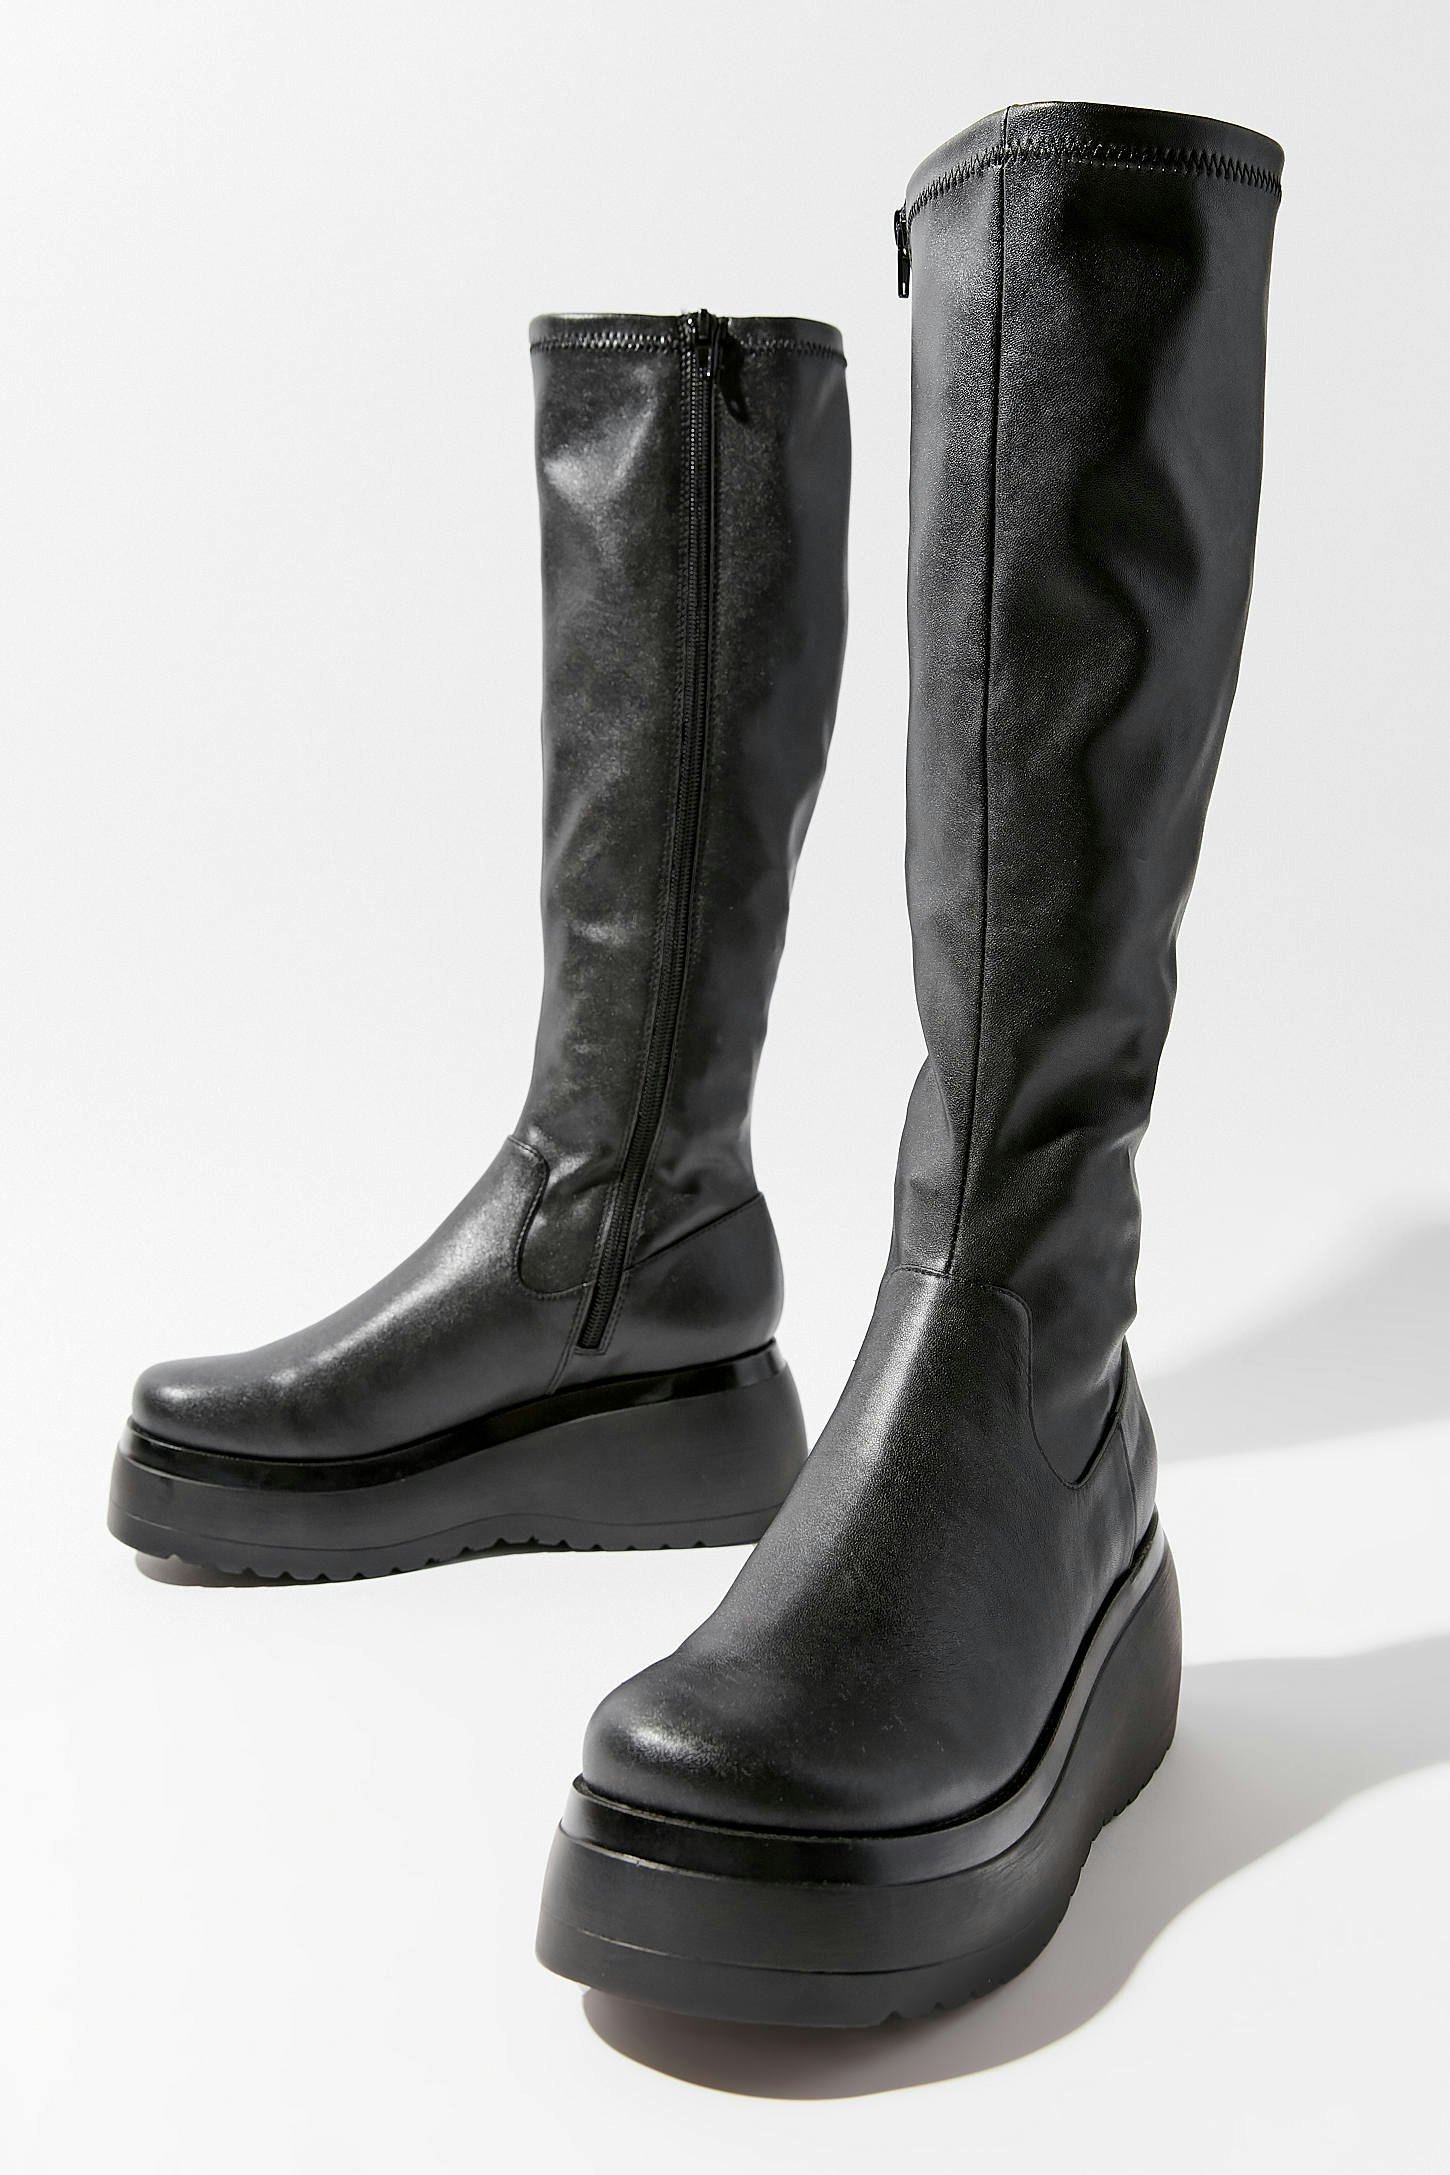 Steve Madden \u0026 Urban Outfitters' New 